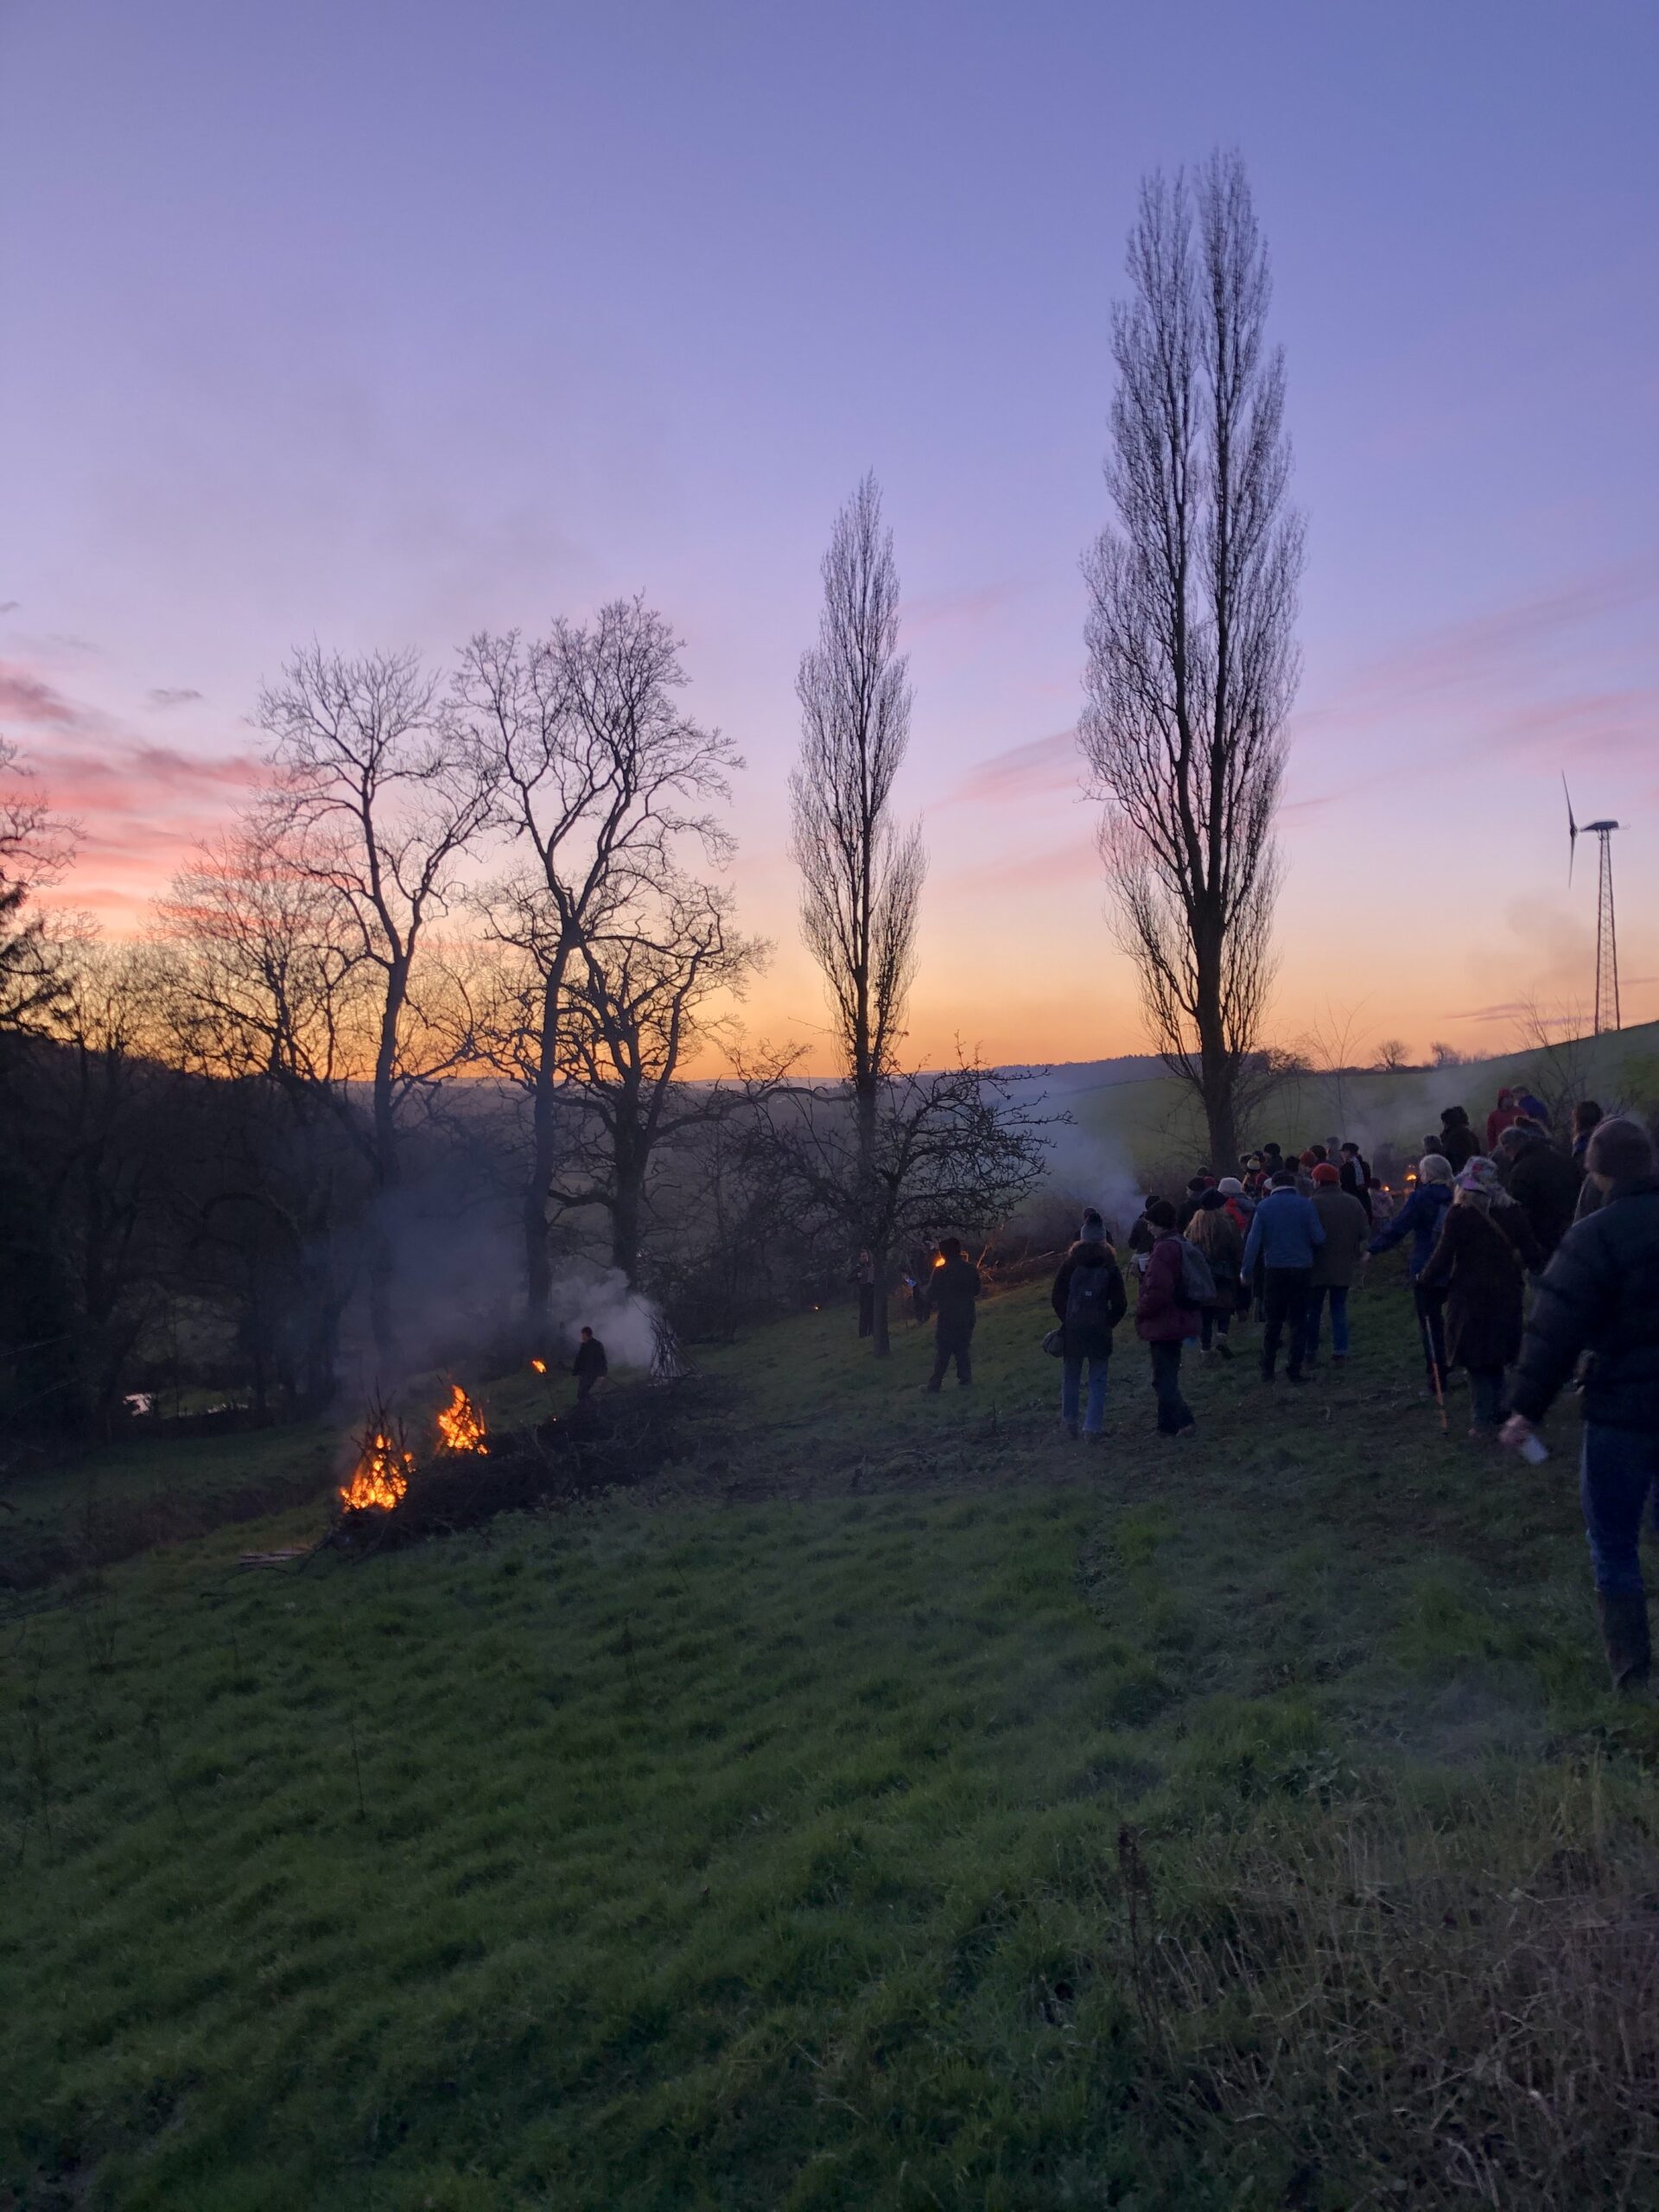 Simon Pope, Wassail, night time outdoor event with a sunset and fire.